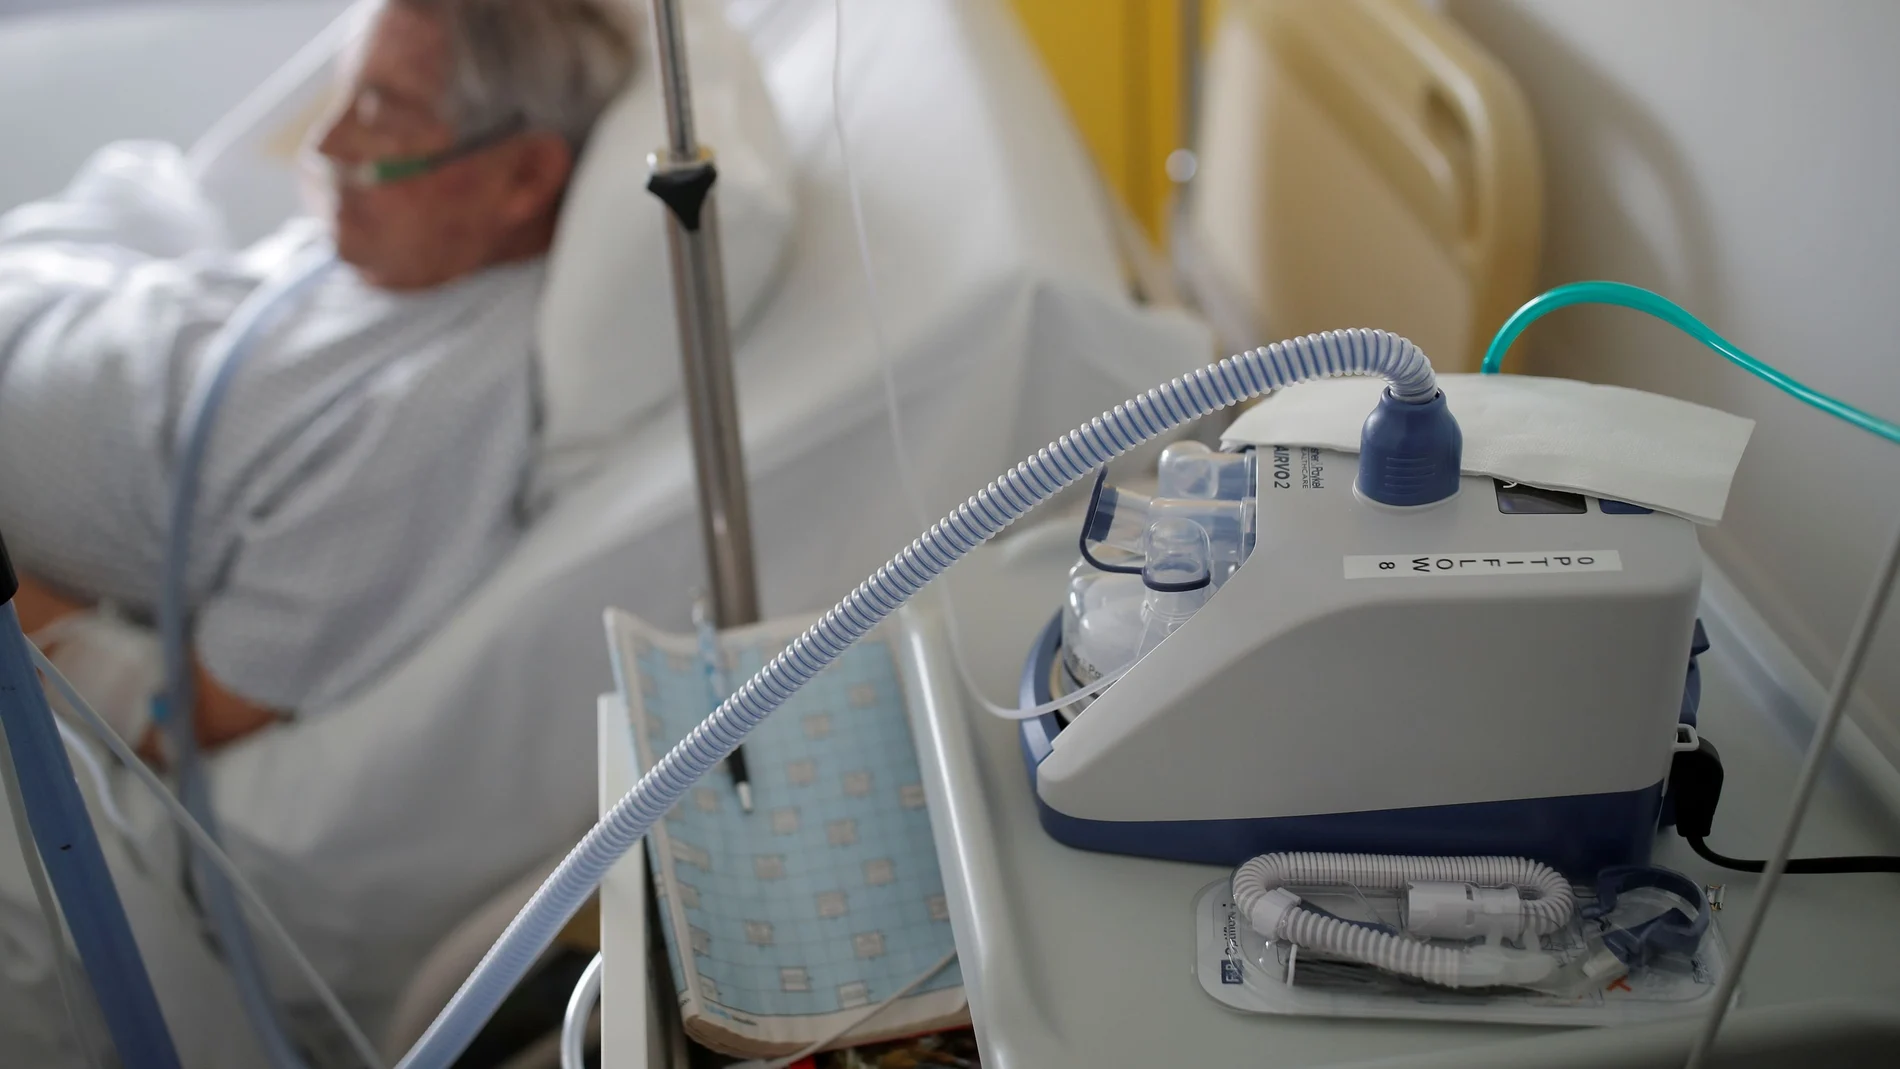 A respiratory humidifier is pictured as a patient suffering from coronavirus disease is treated in a pulmonology unit at the hospital in Vannes